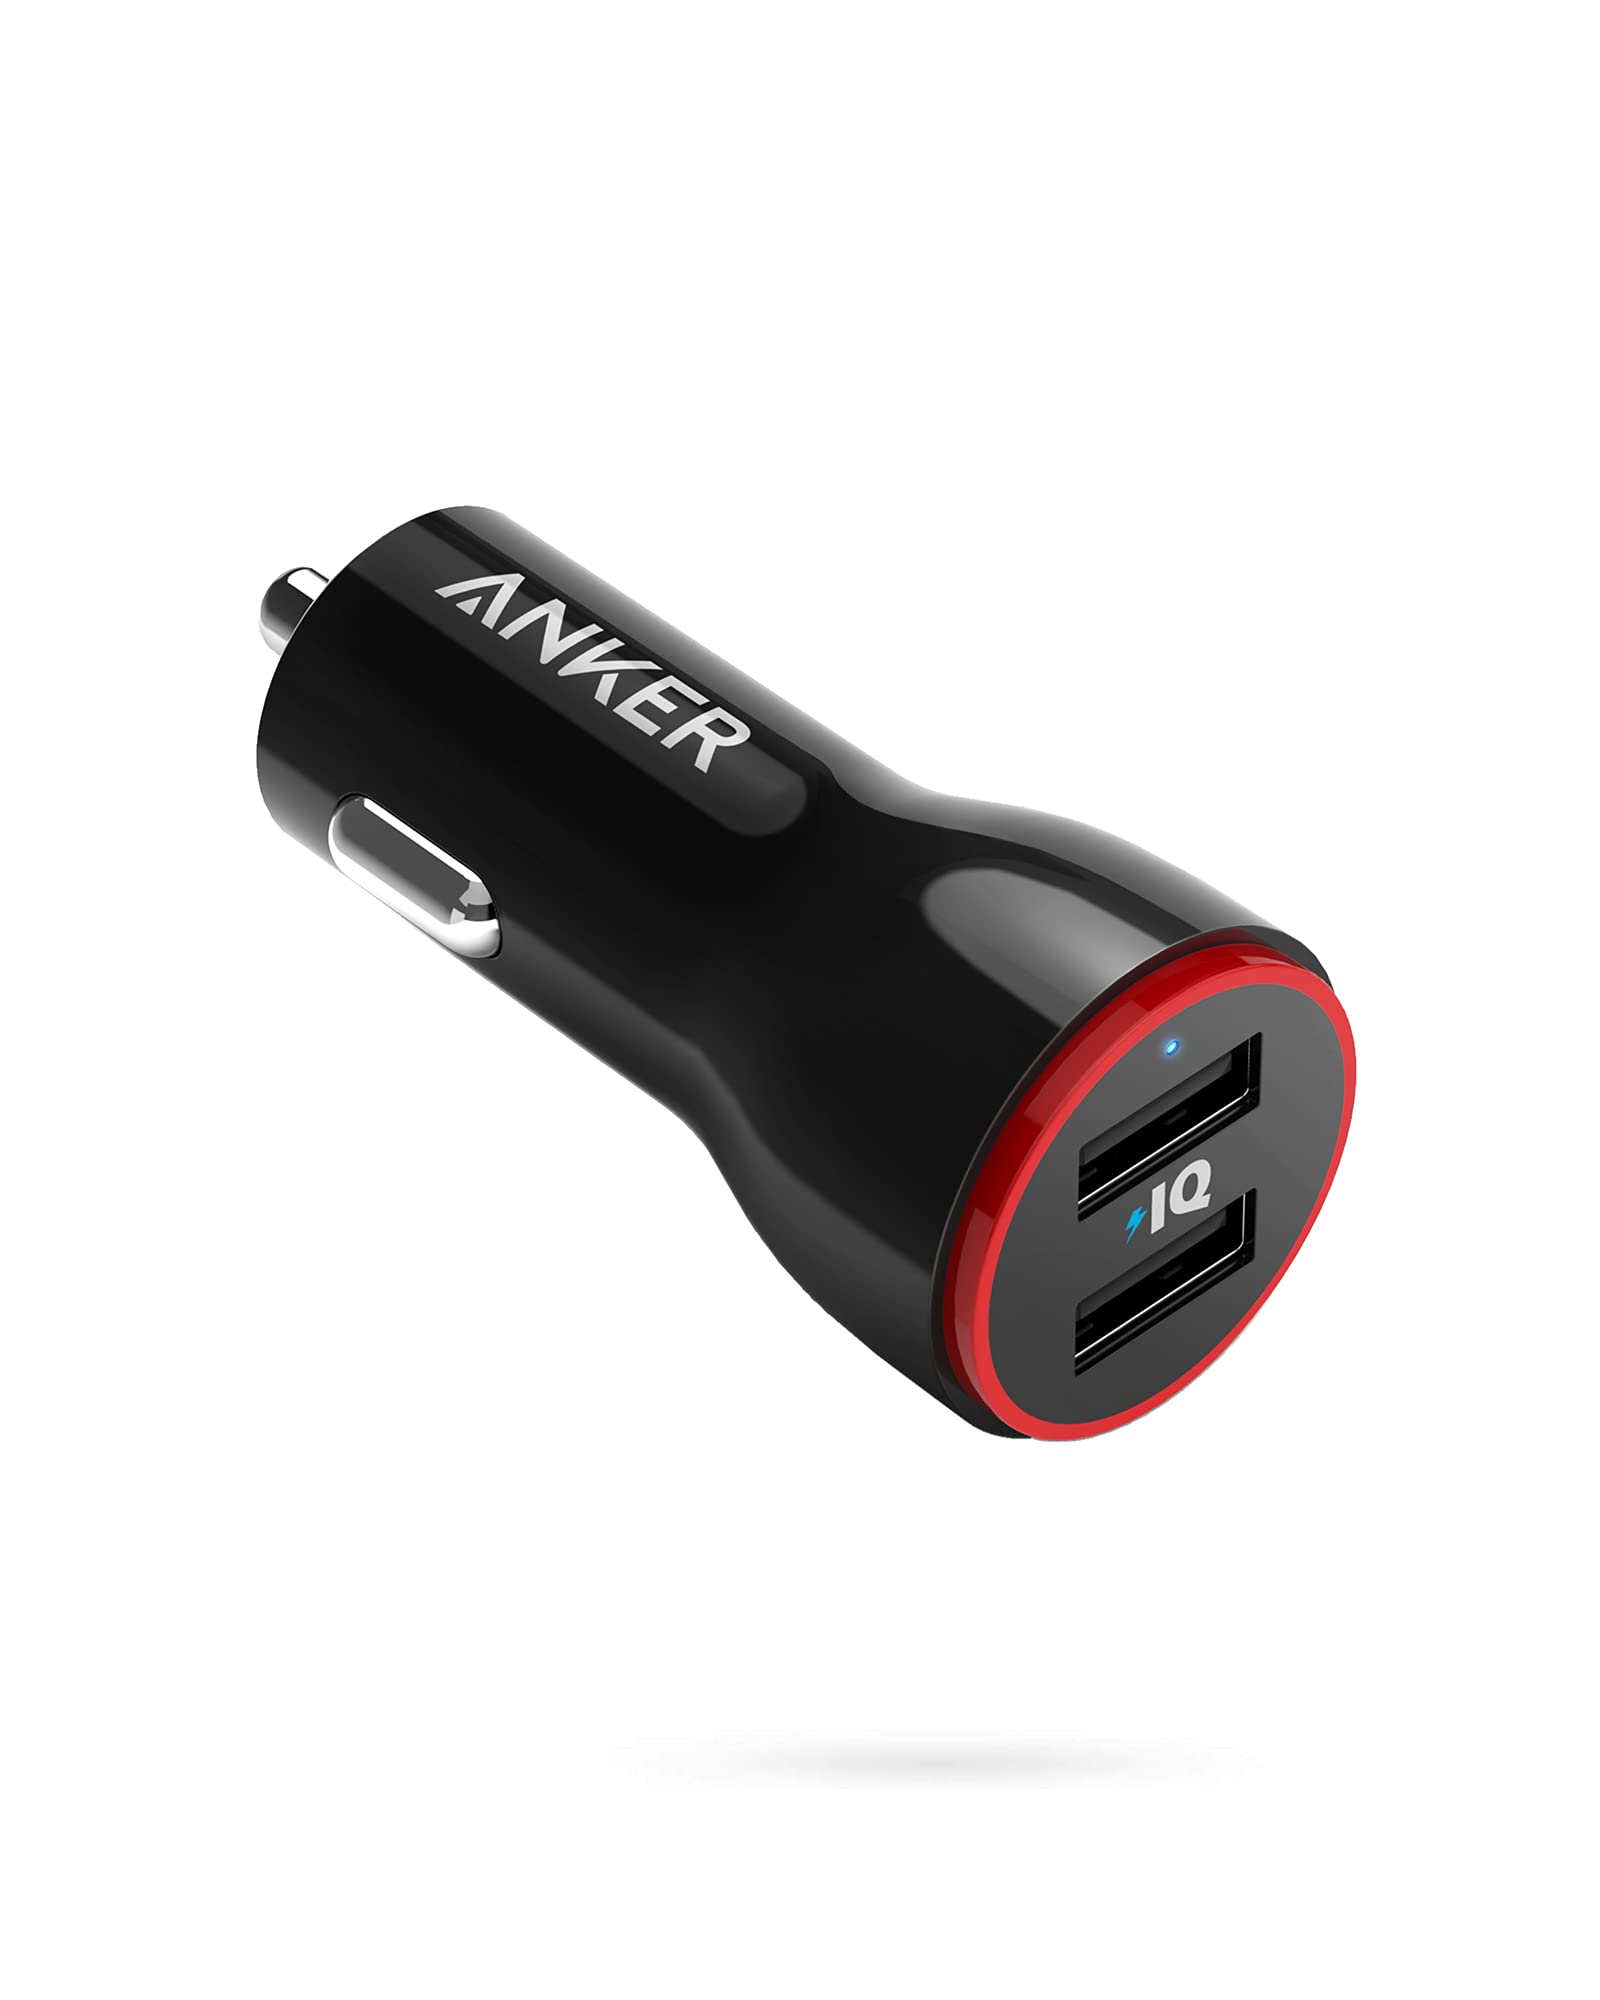 Anker Car Charger Adapter, 24W Dual USB Car Phone Charger, PowerDrive 2 for iPhone 14 13 12 11 Pro Max Mini X XR XS 8 Plus, iPad Pro/Air 2/Mini, Note 5/4, LG, Nexus, HTC and More